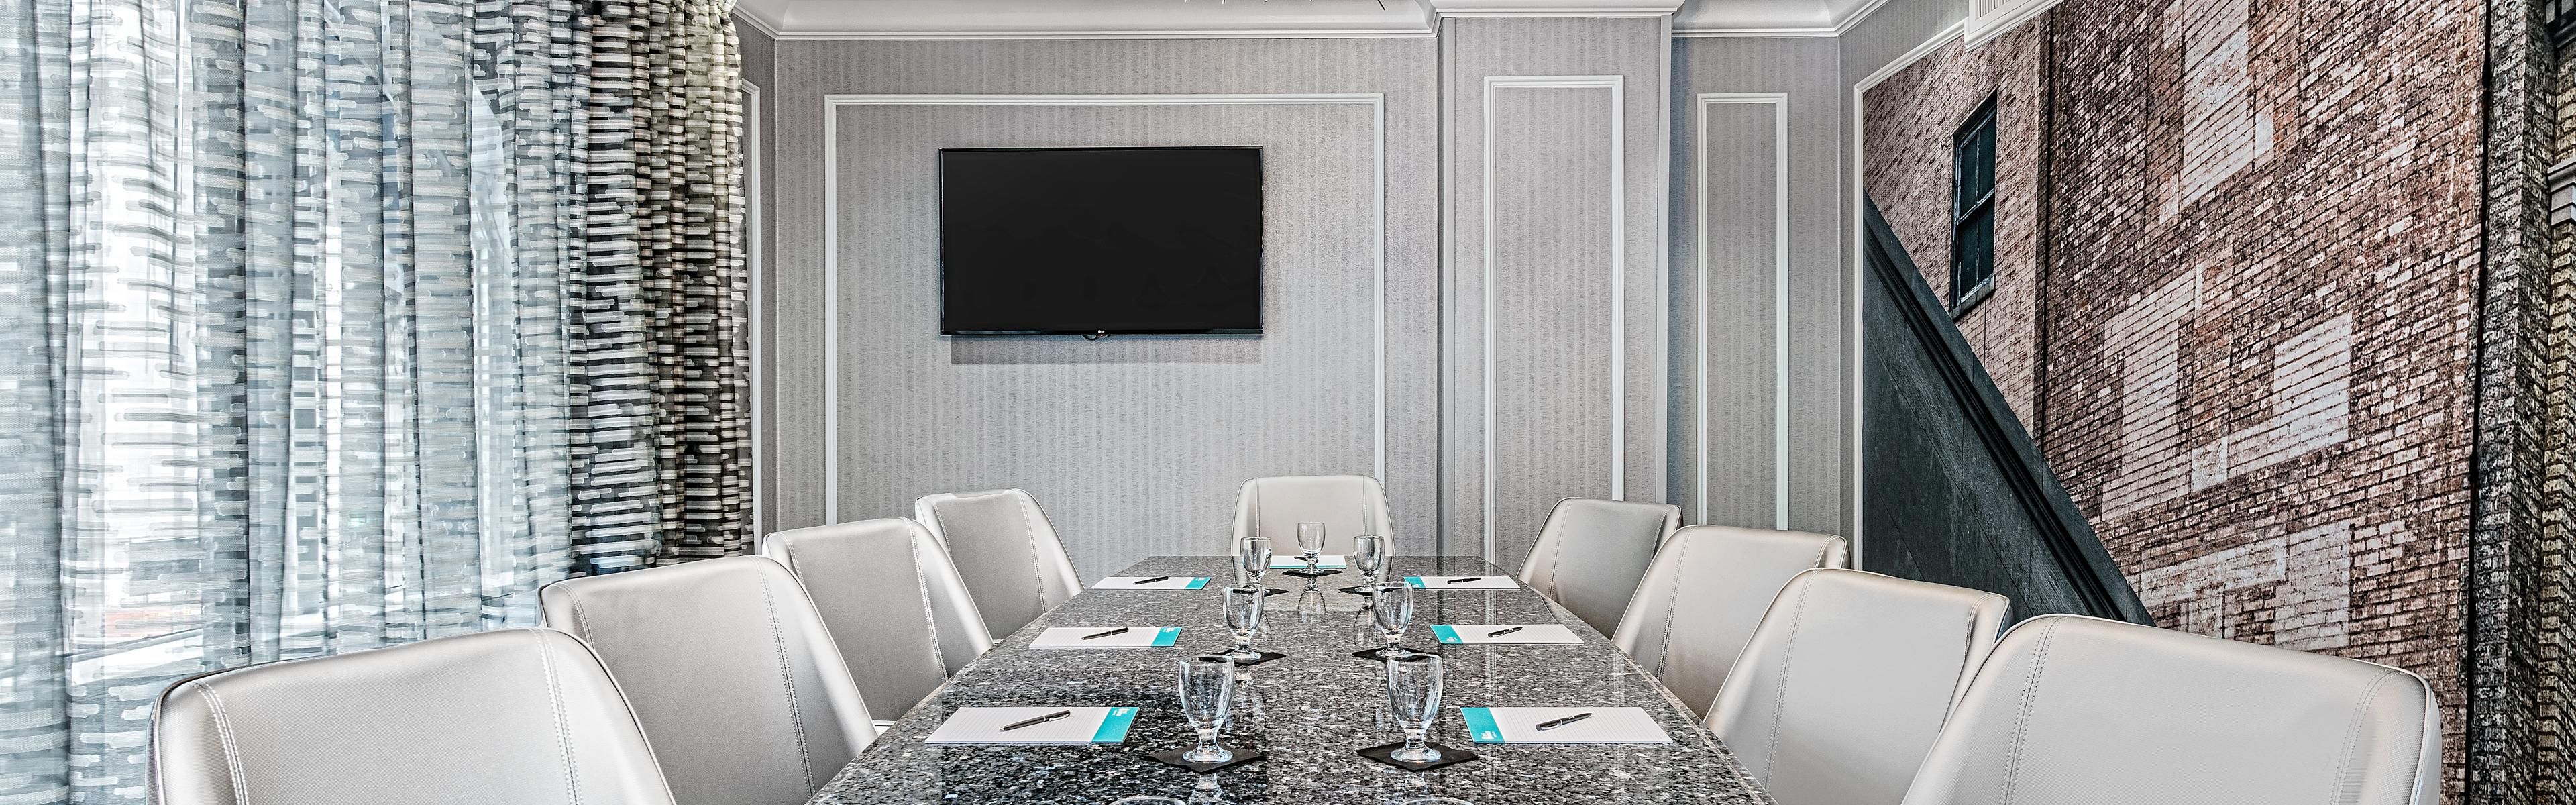 Conduct your meeting in style: Historic Conrad Board Room.